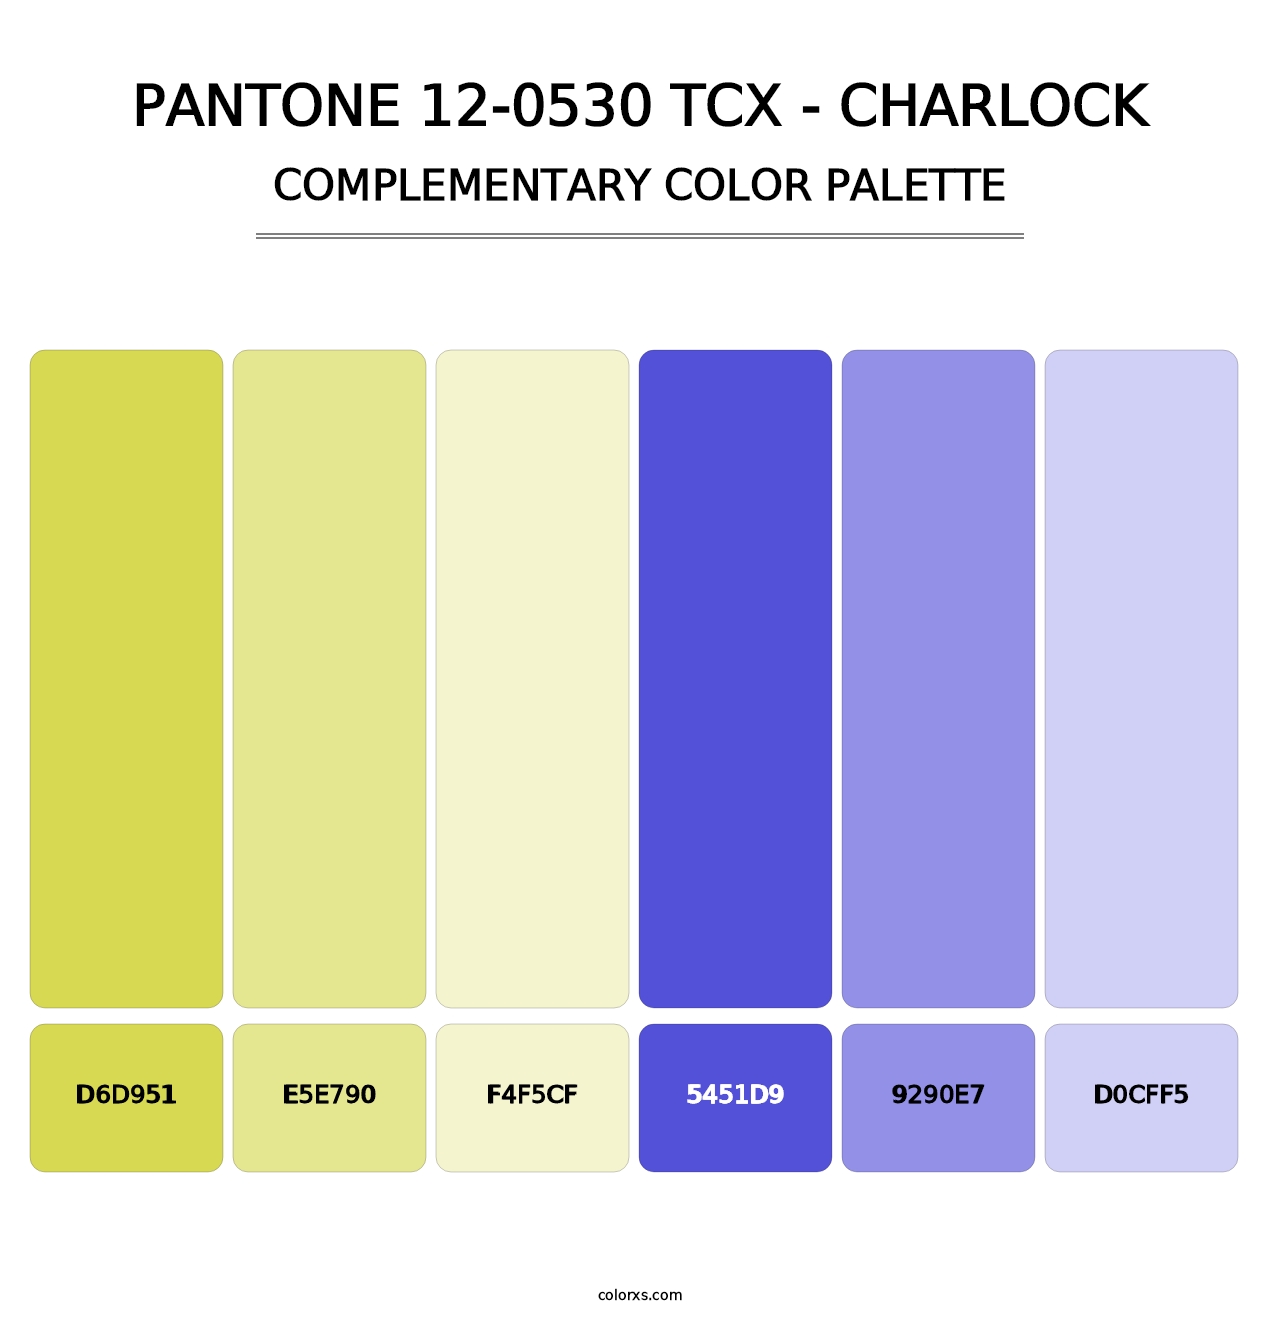 PANTONE 12-0530 TCX - Charlock - Complementary Color Palette